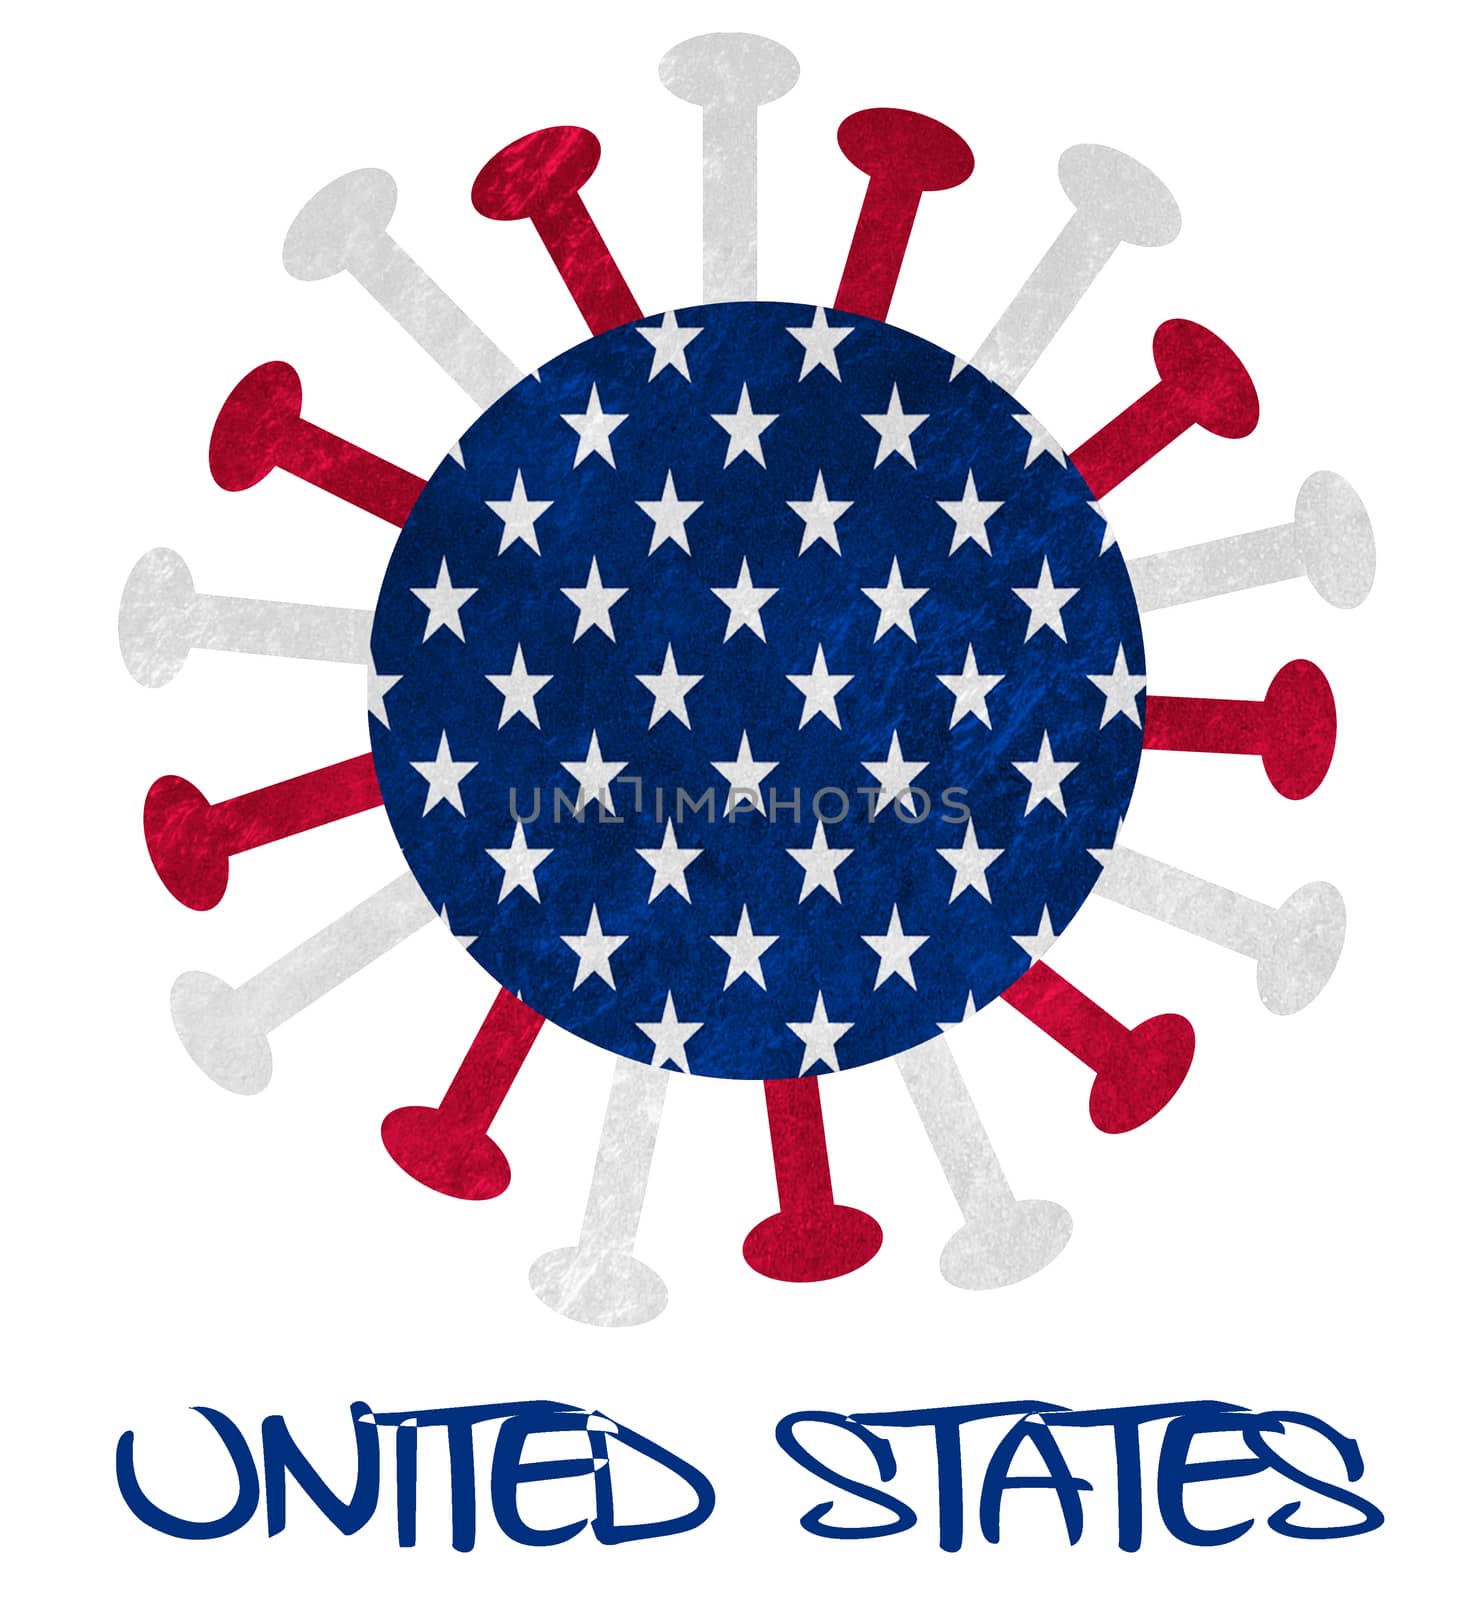 The national flag of the United States with corona virus or bact by michaklootwijk